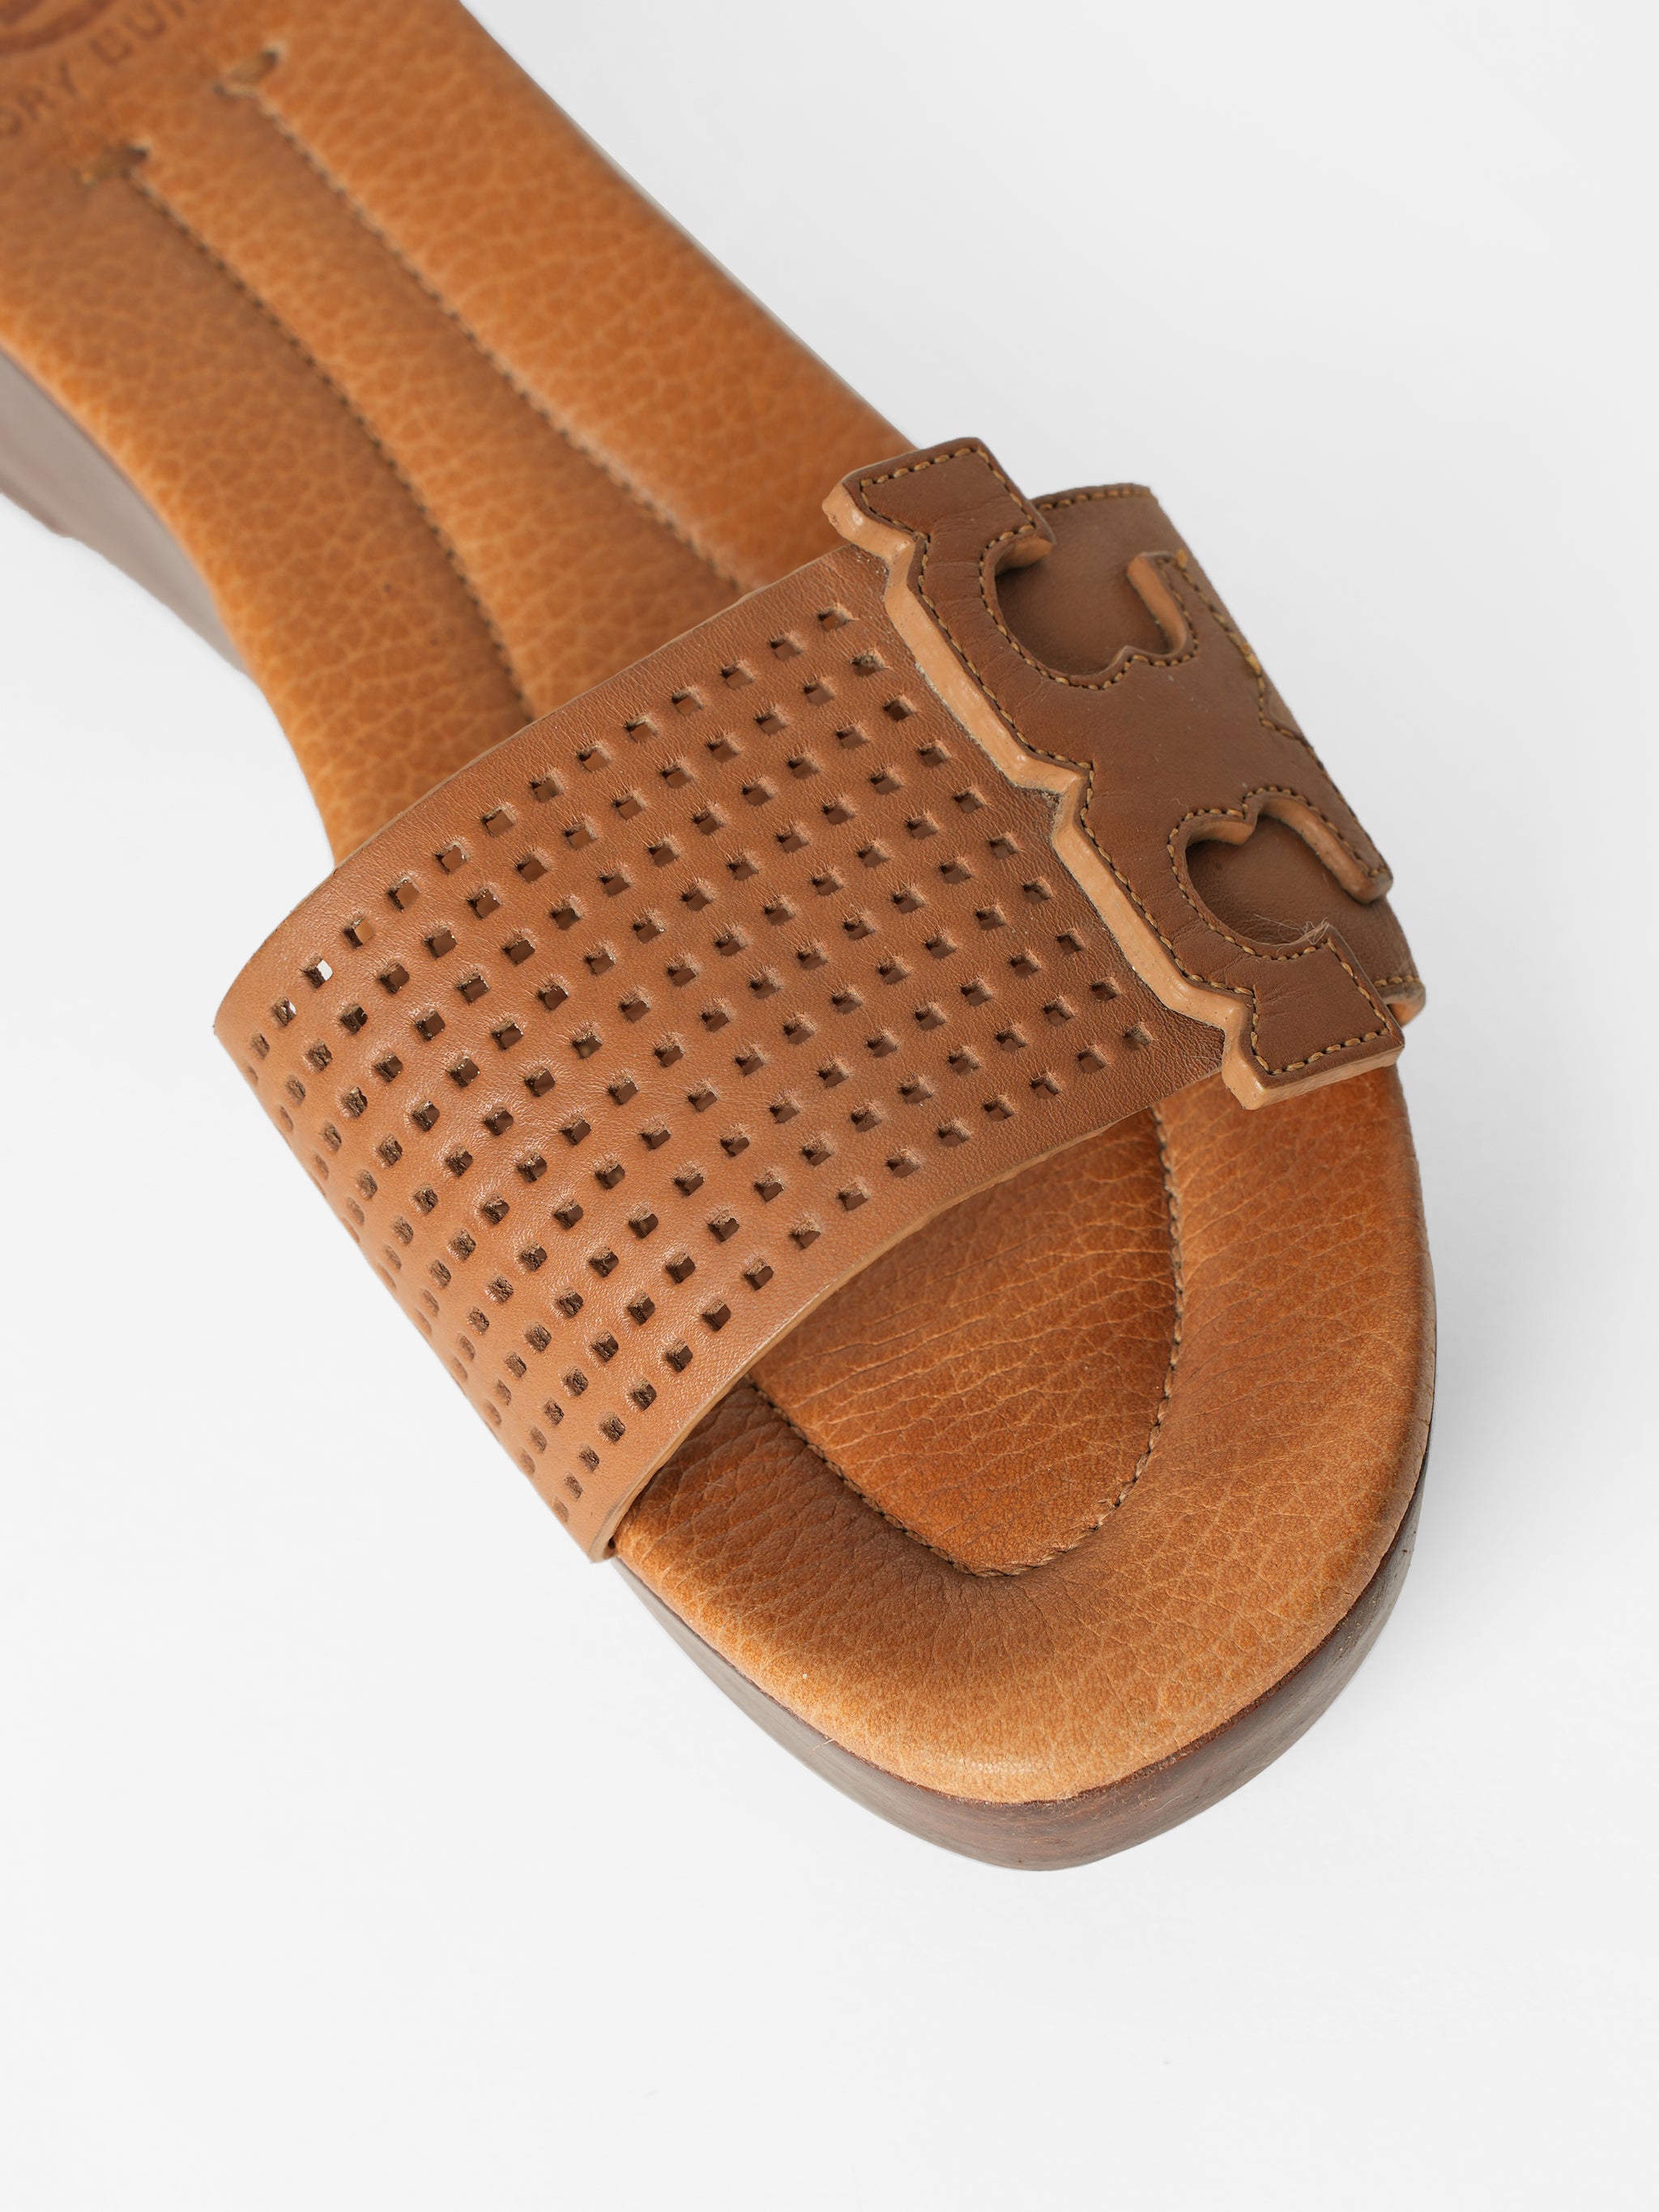 Tory Burch Leather Wedges